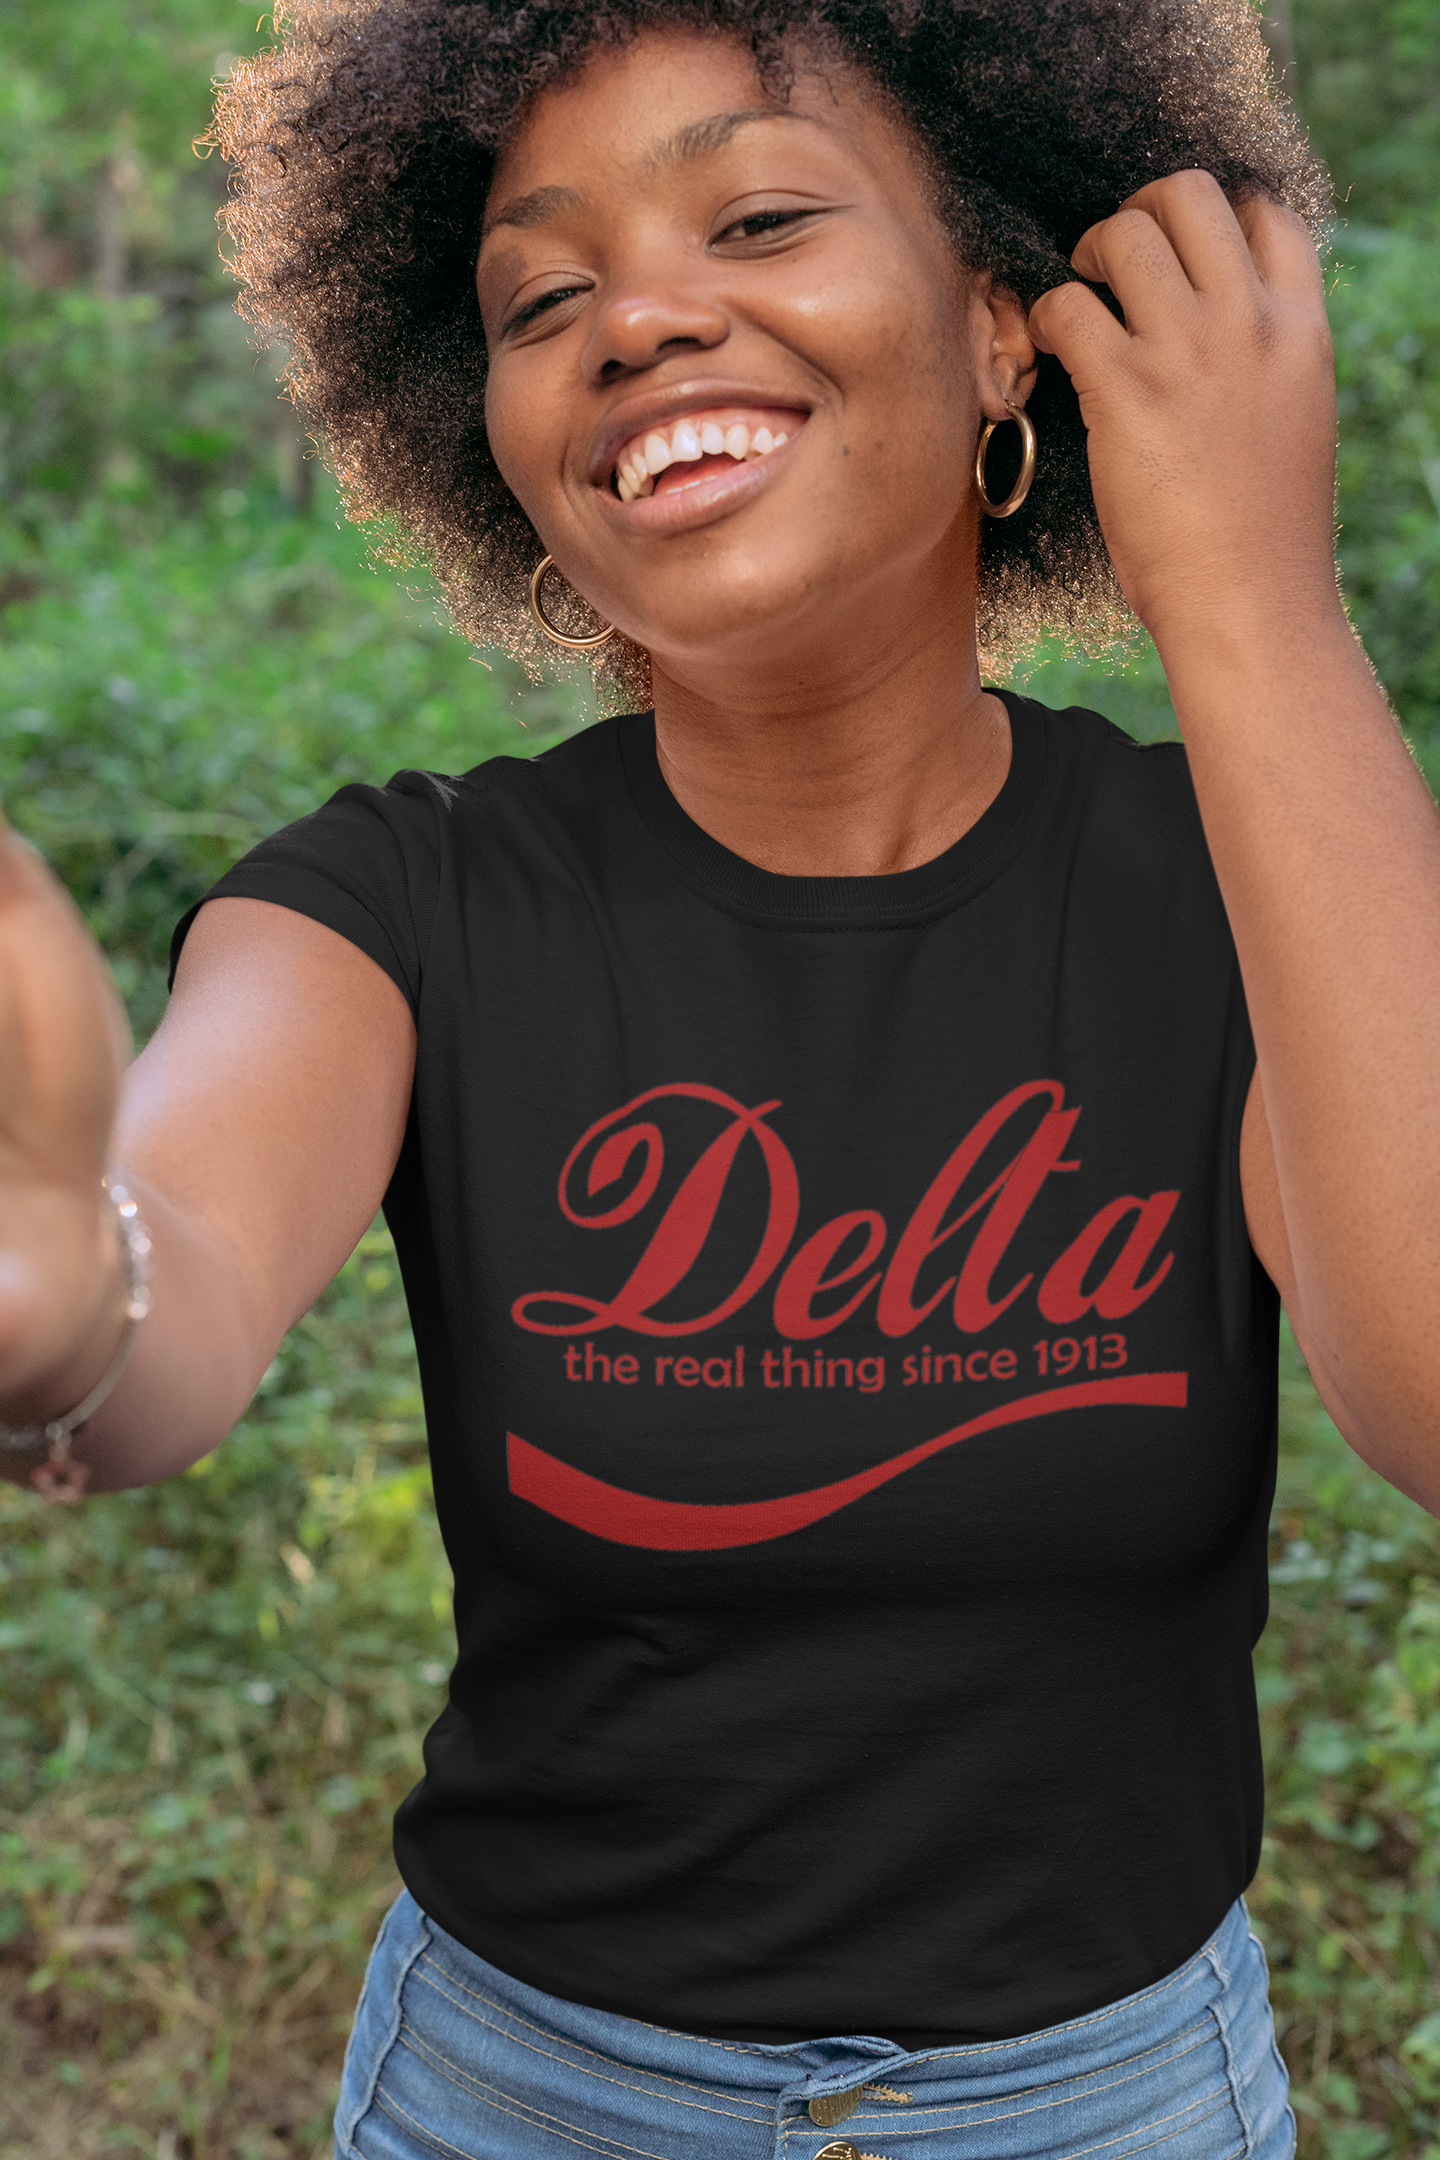 Delta … The Real Thing Since 1913 T-shirt